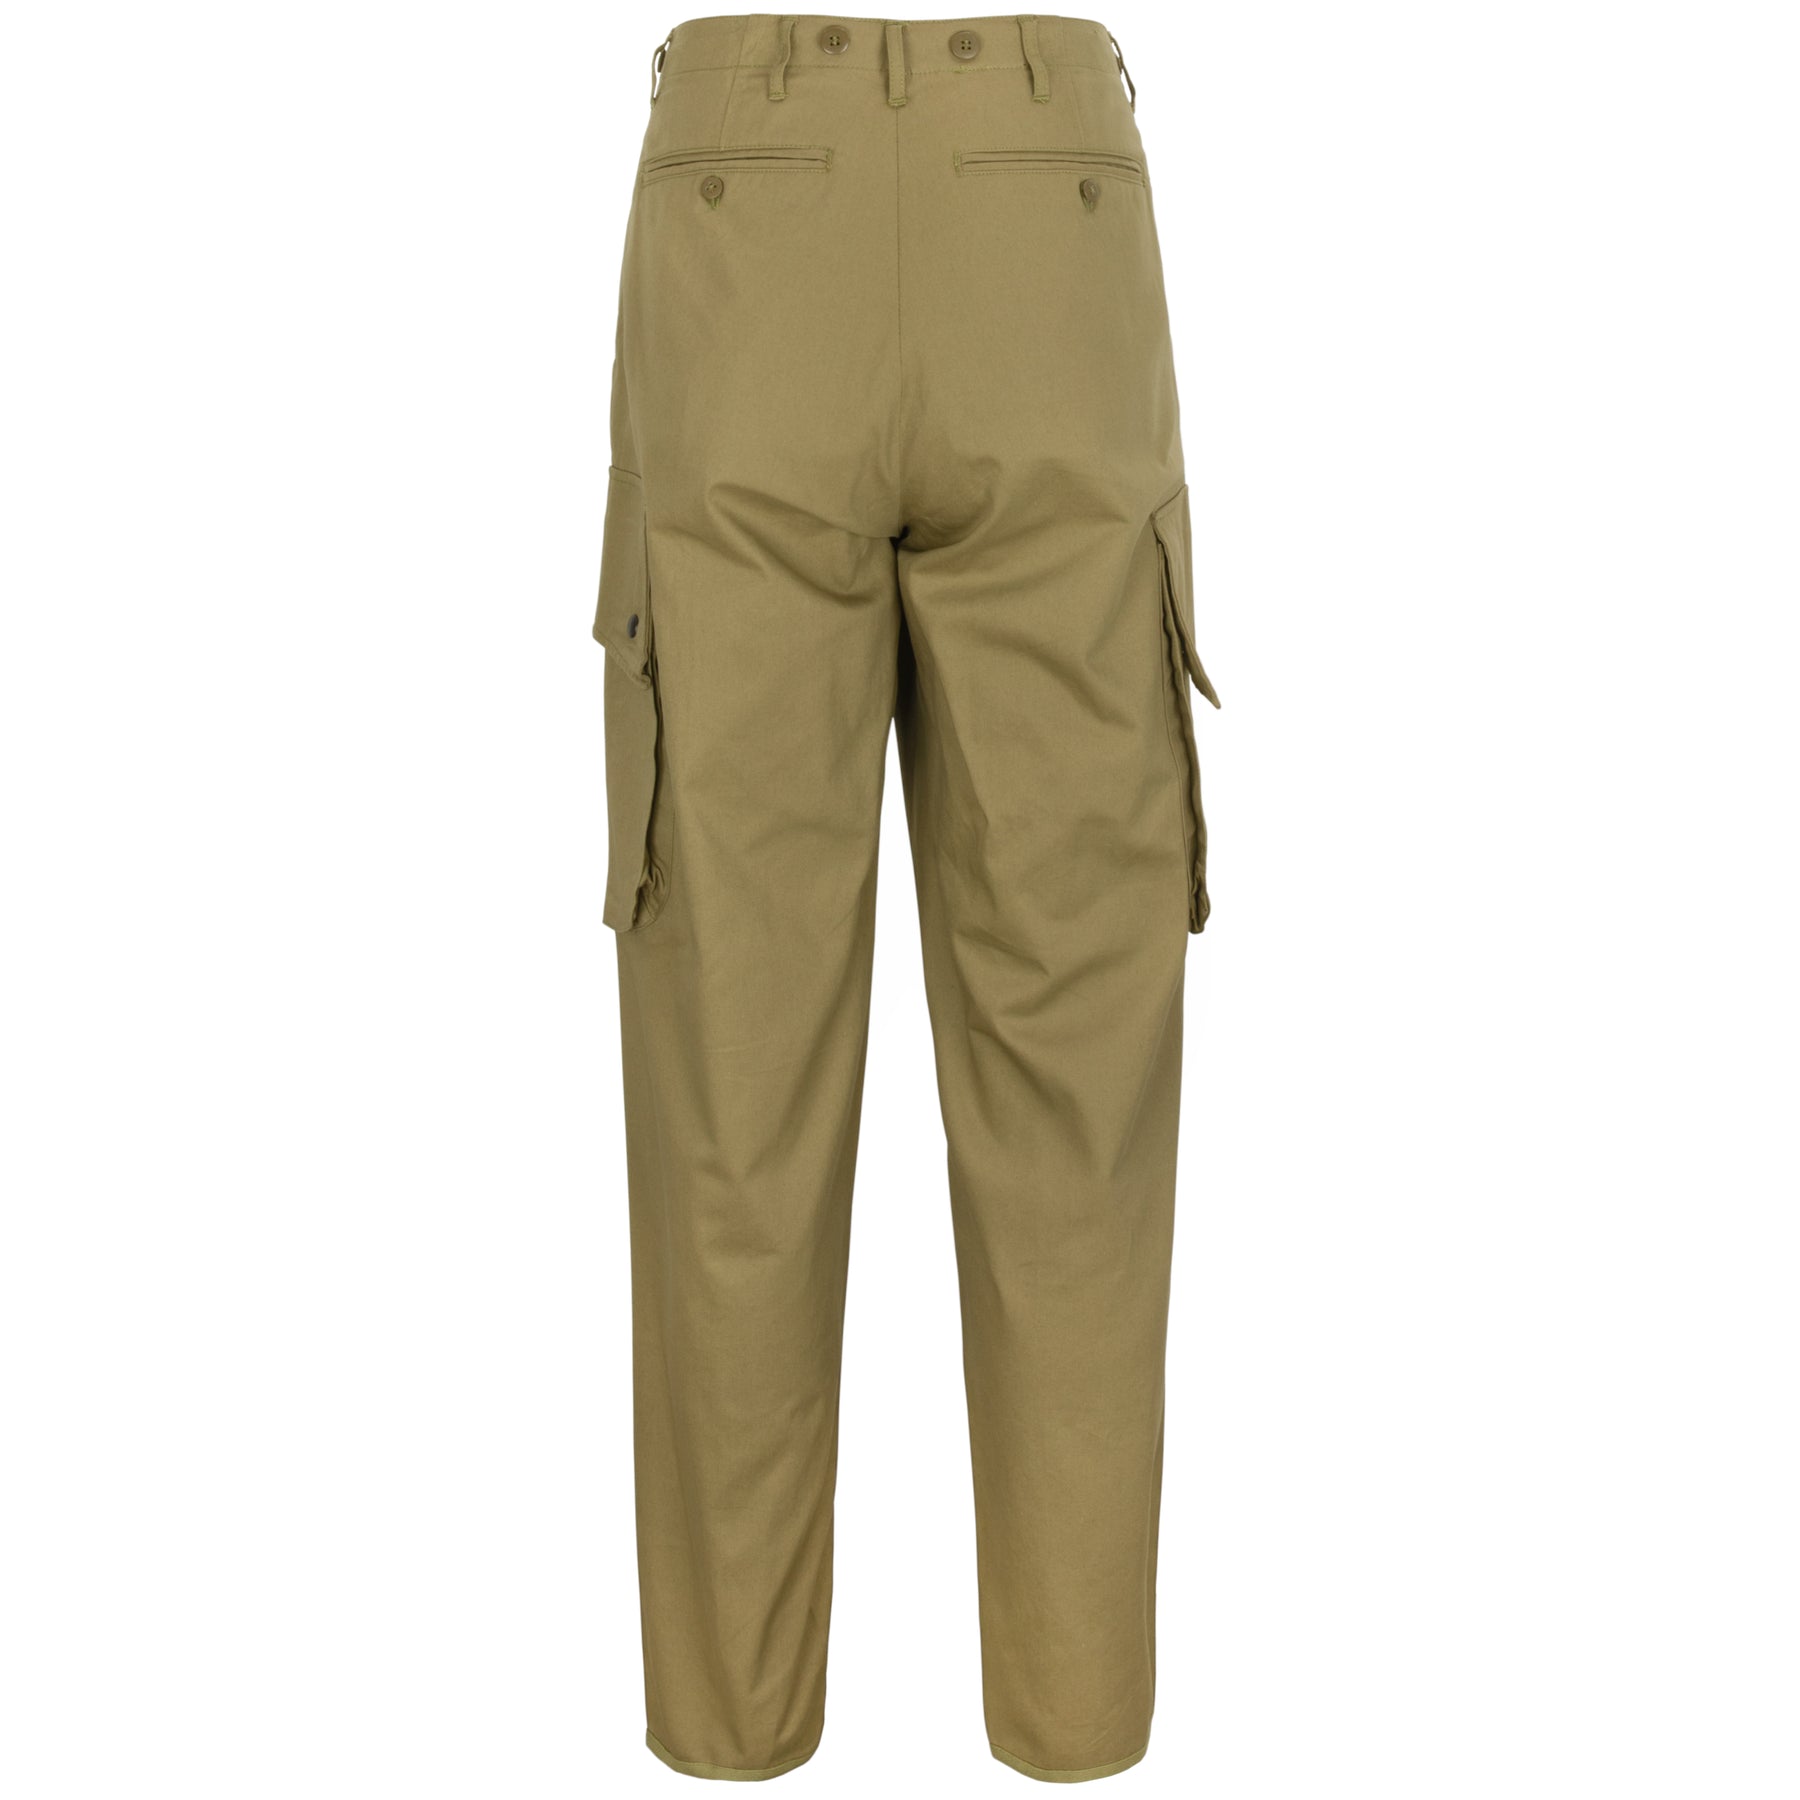 U.S. Army M42 WWII Reproduction | Paratrooper Pants